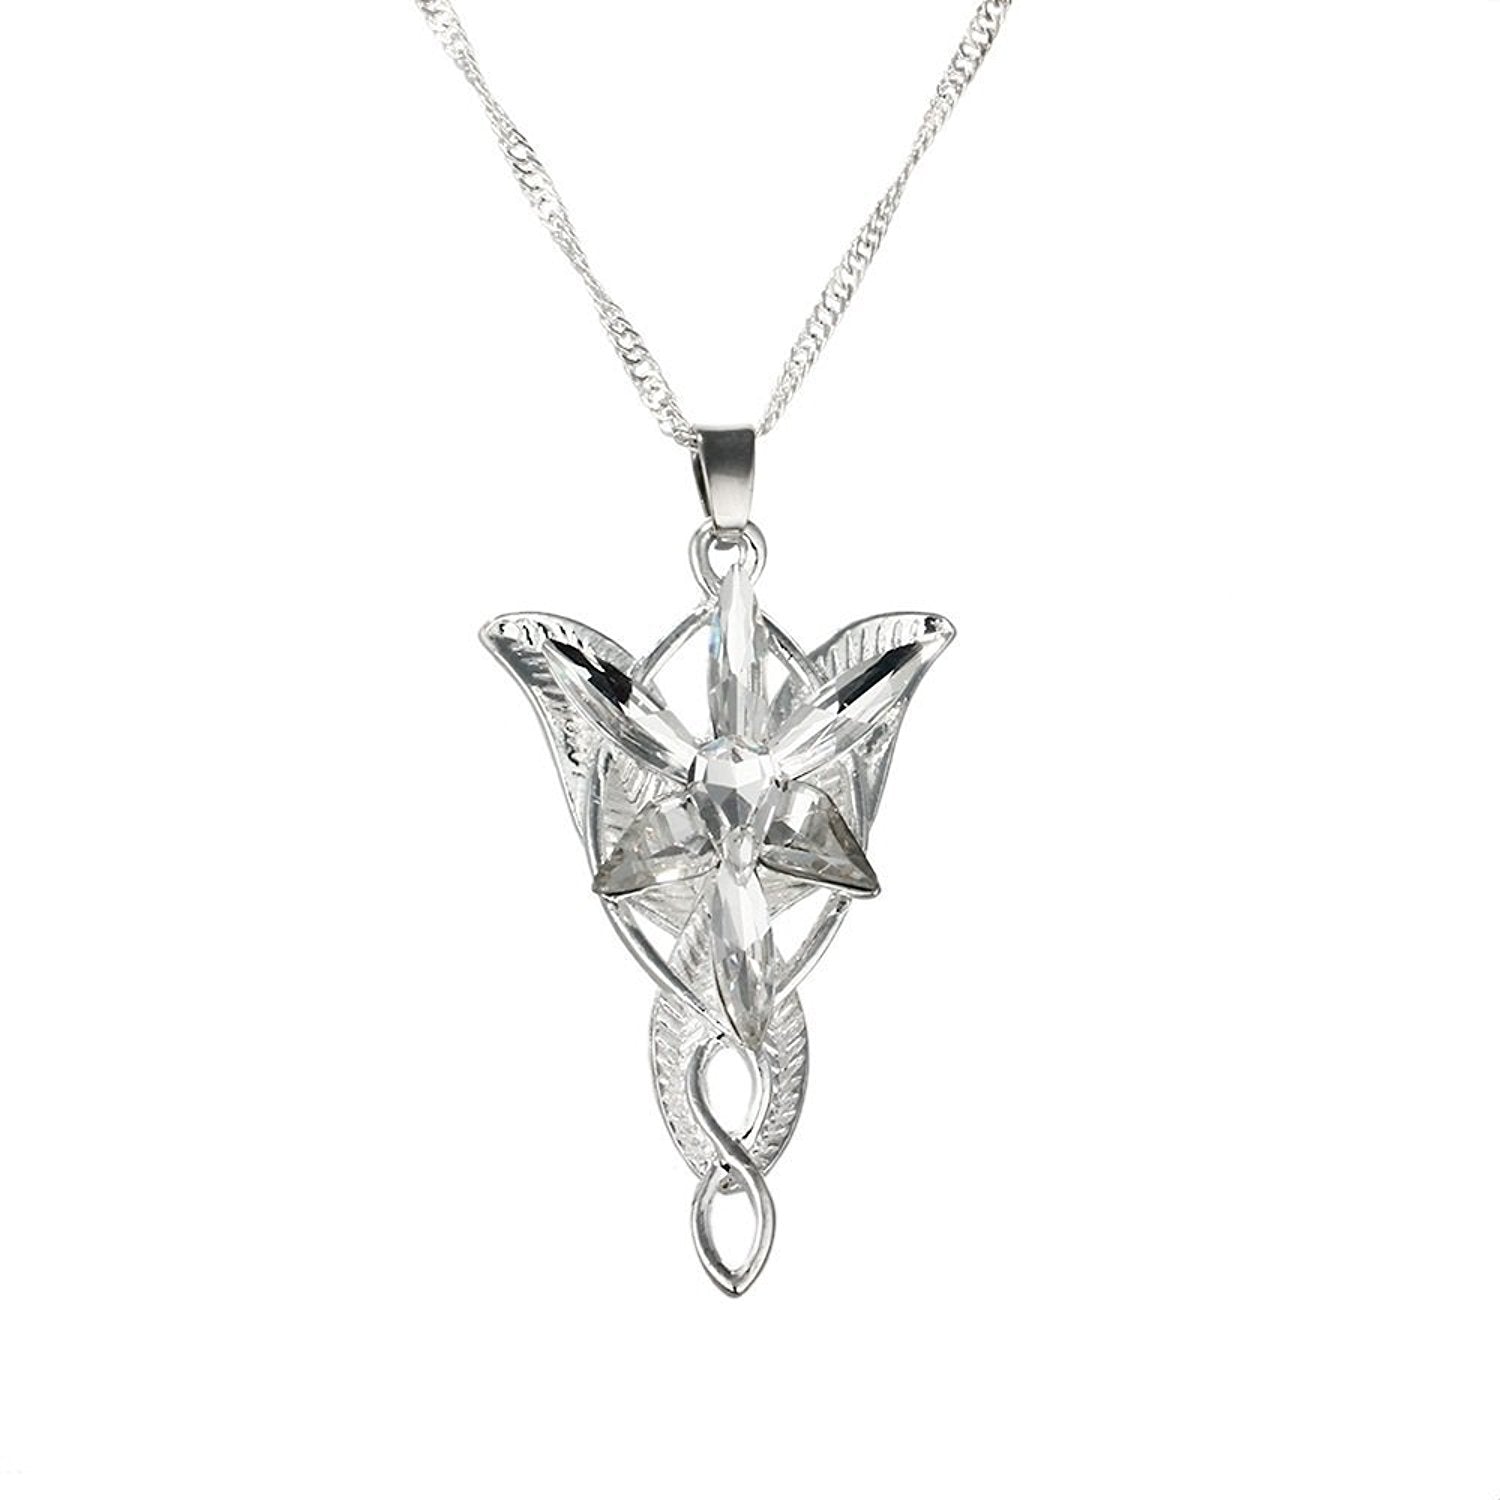 Arwen's Evenstar Lord of The Rings